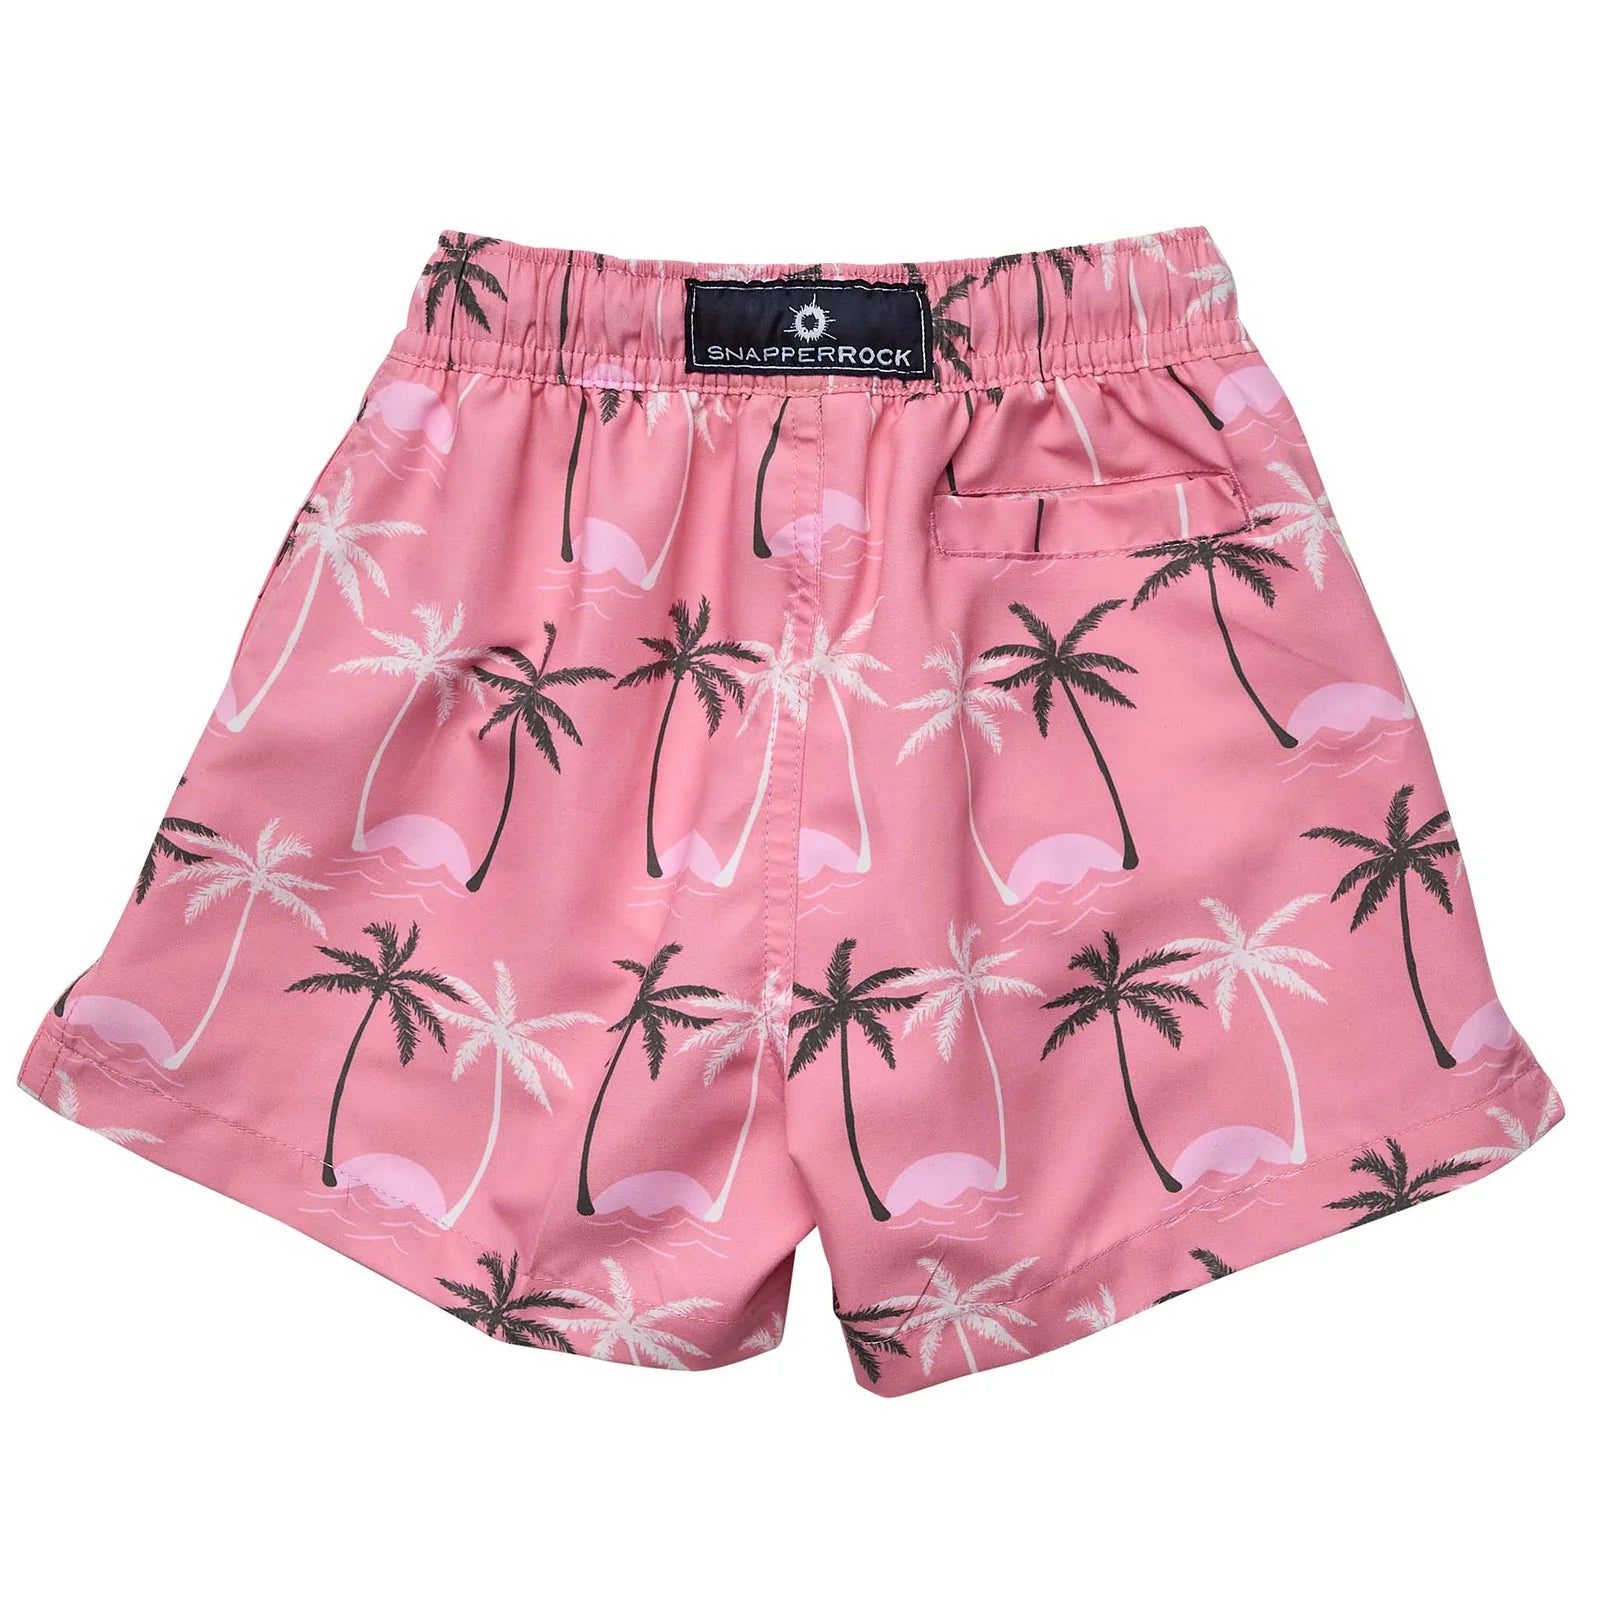 Snapper Rock Palm Paradise Sustainable Volley Board Shorts - Destination PSP